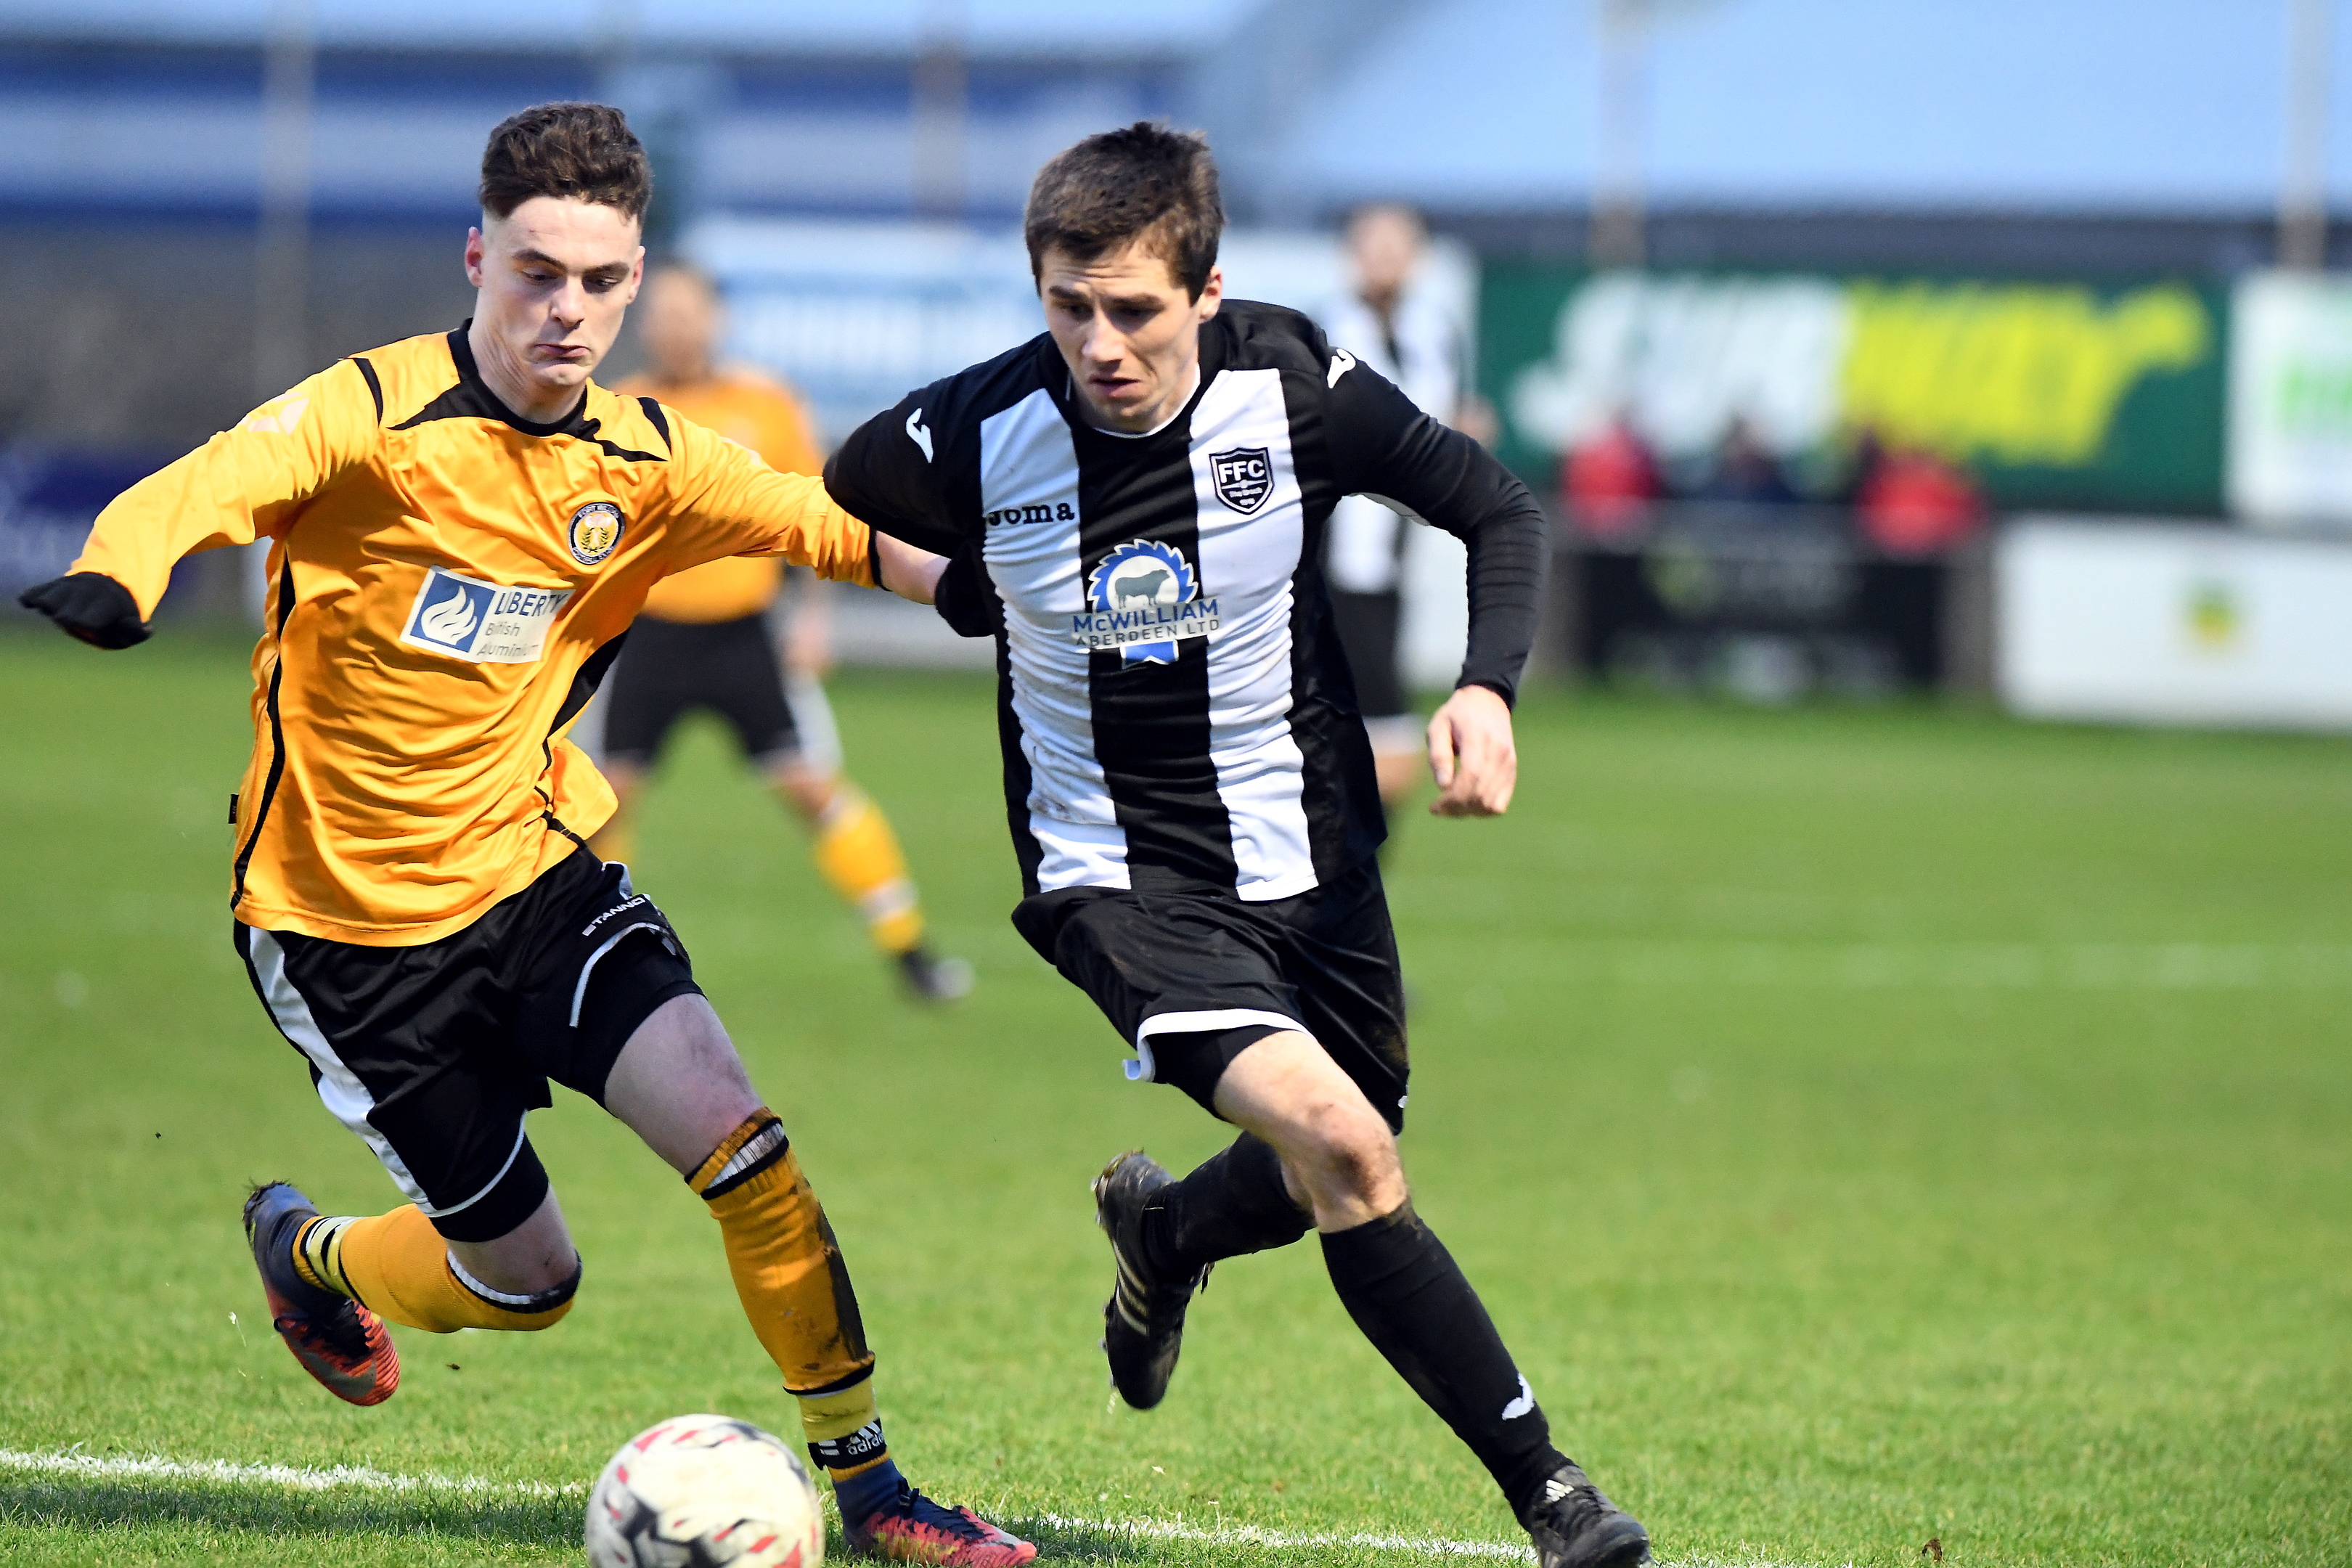 Fraserburgh's Paul Young against Fort William